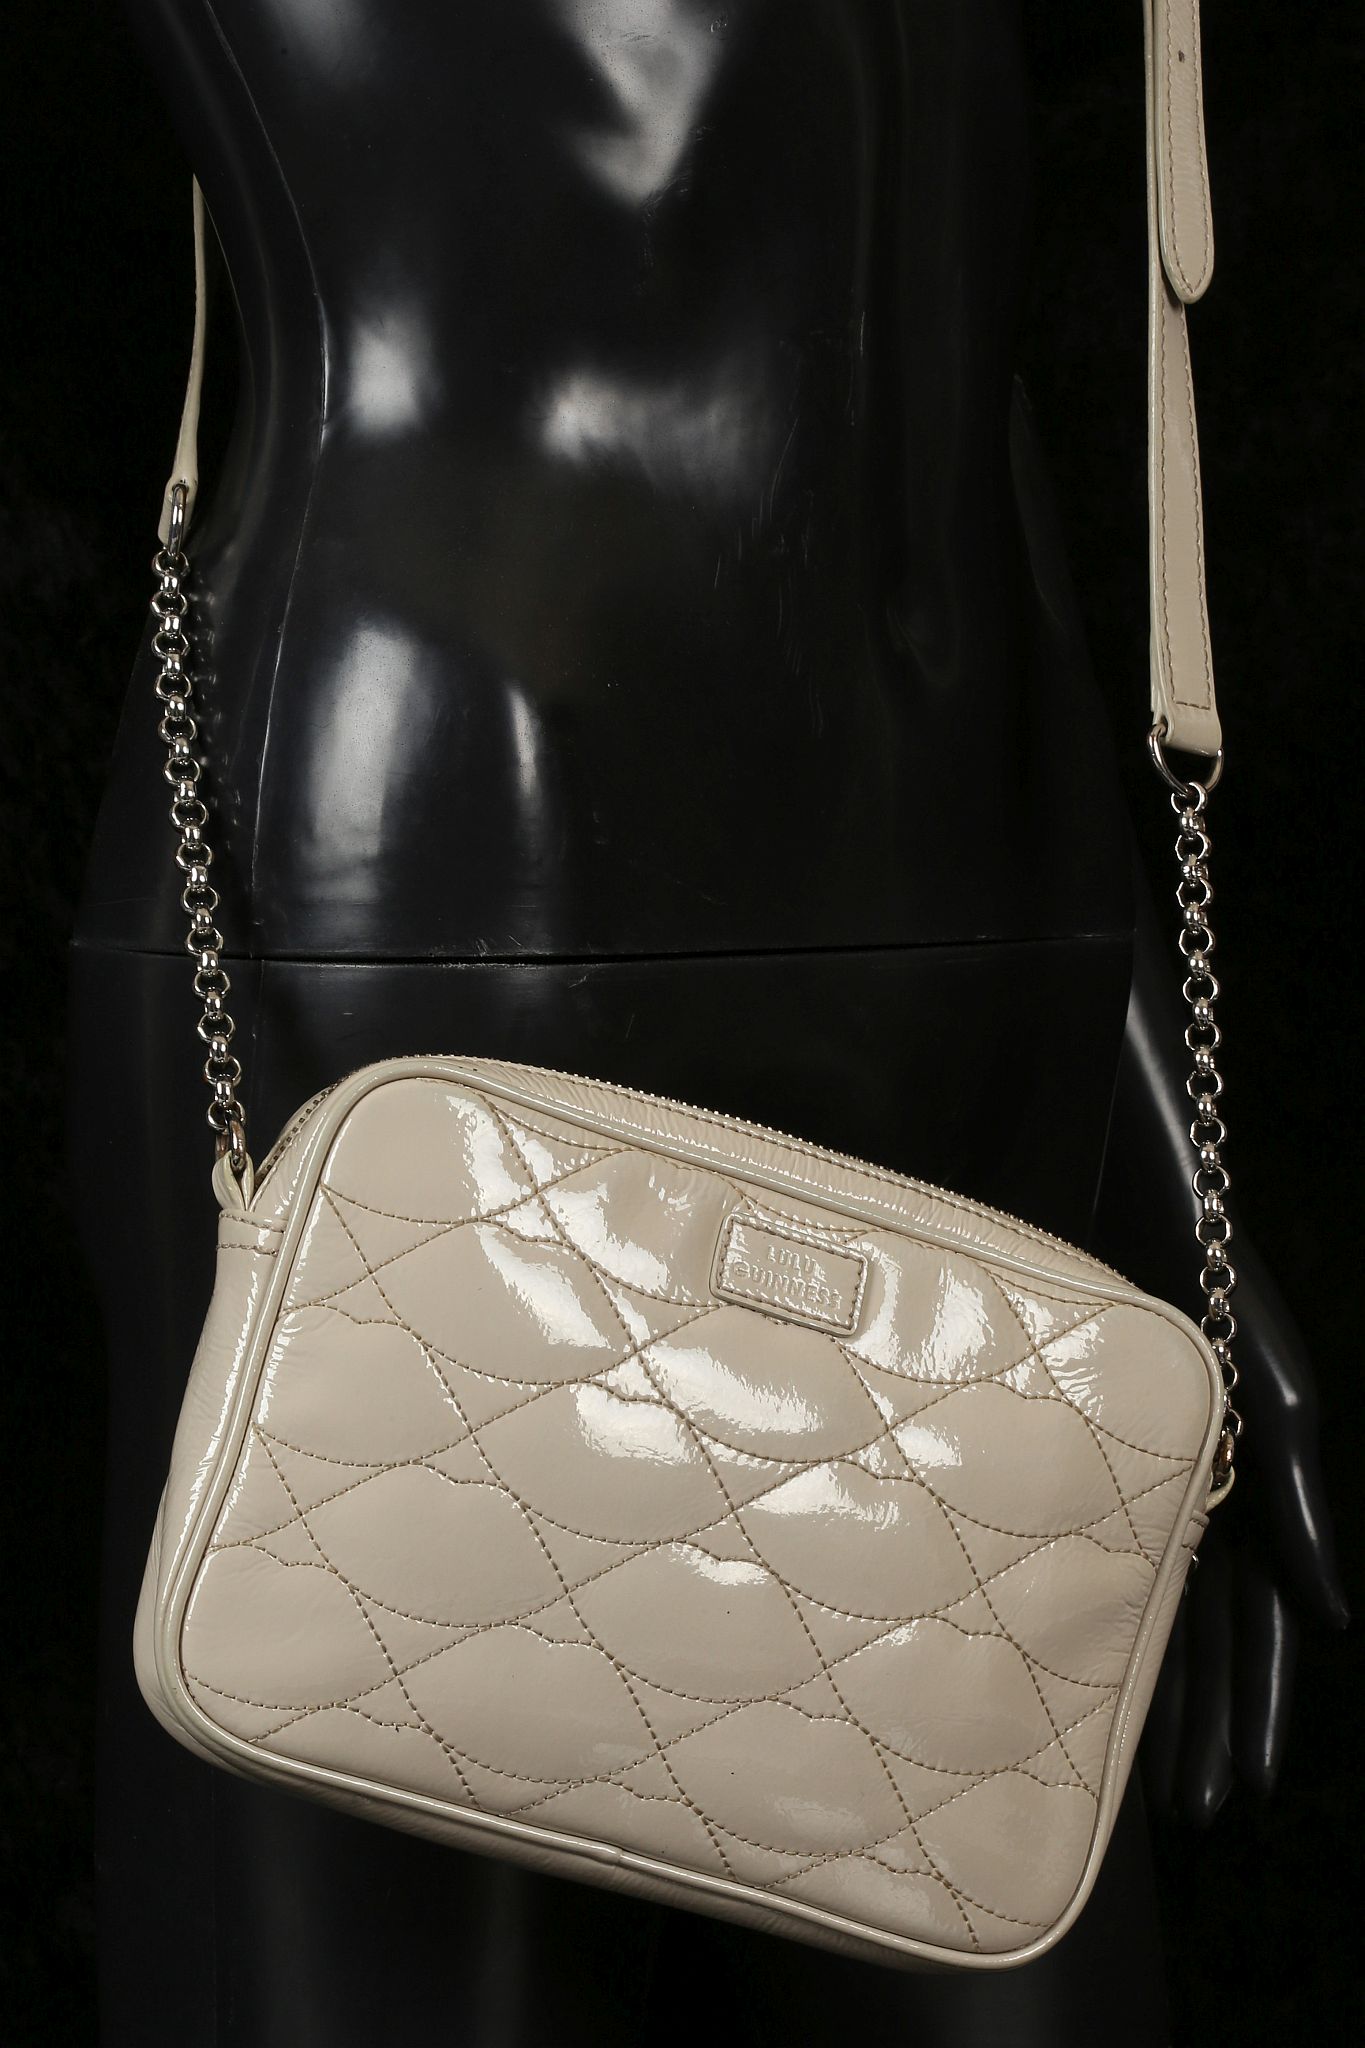 LULU GUINNESS LIPS HANDBAG, beige patent leather with stitched lips pattern, silver tone hardware, - Image 5 of 12